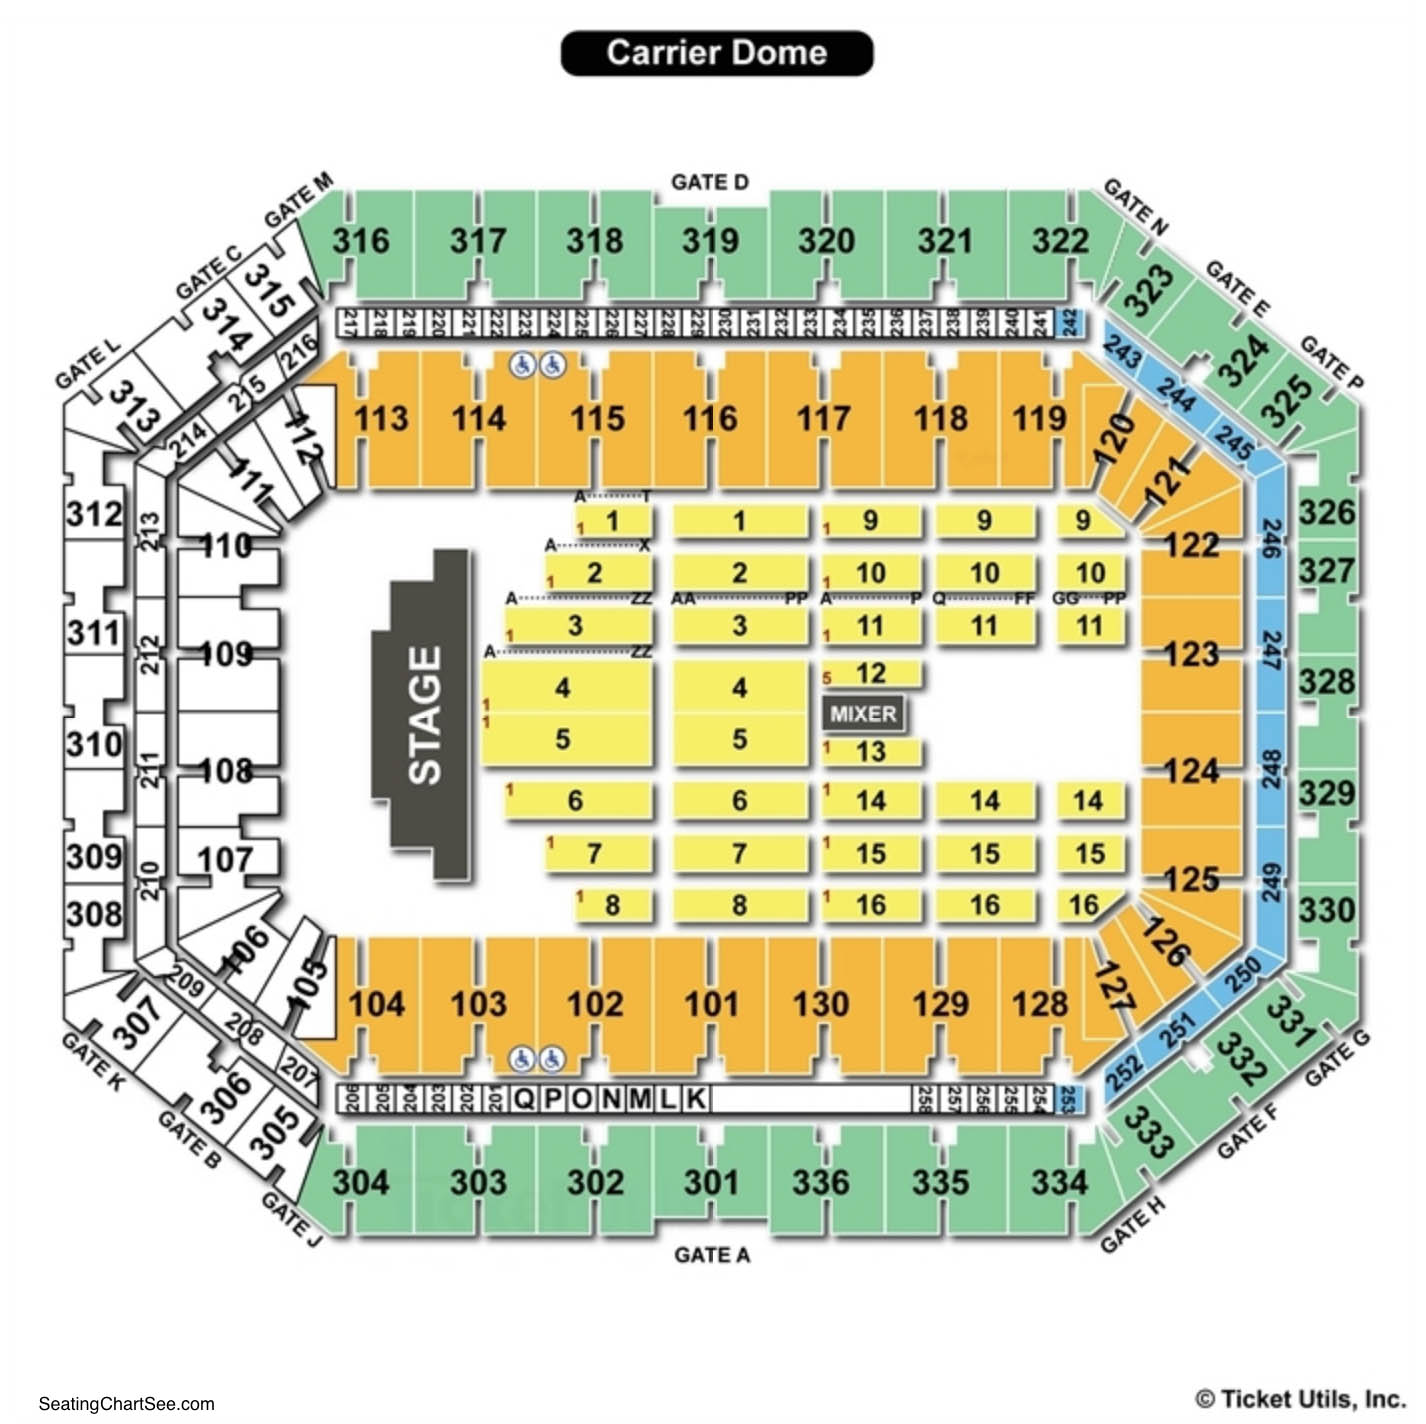 Carrier Dome Seating Chart Concert.